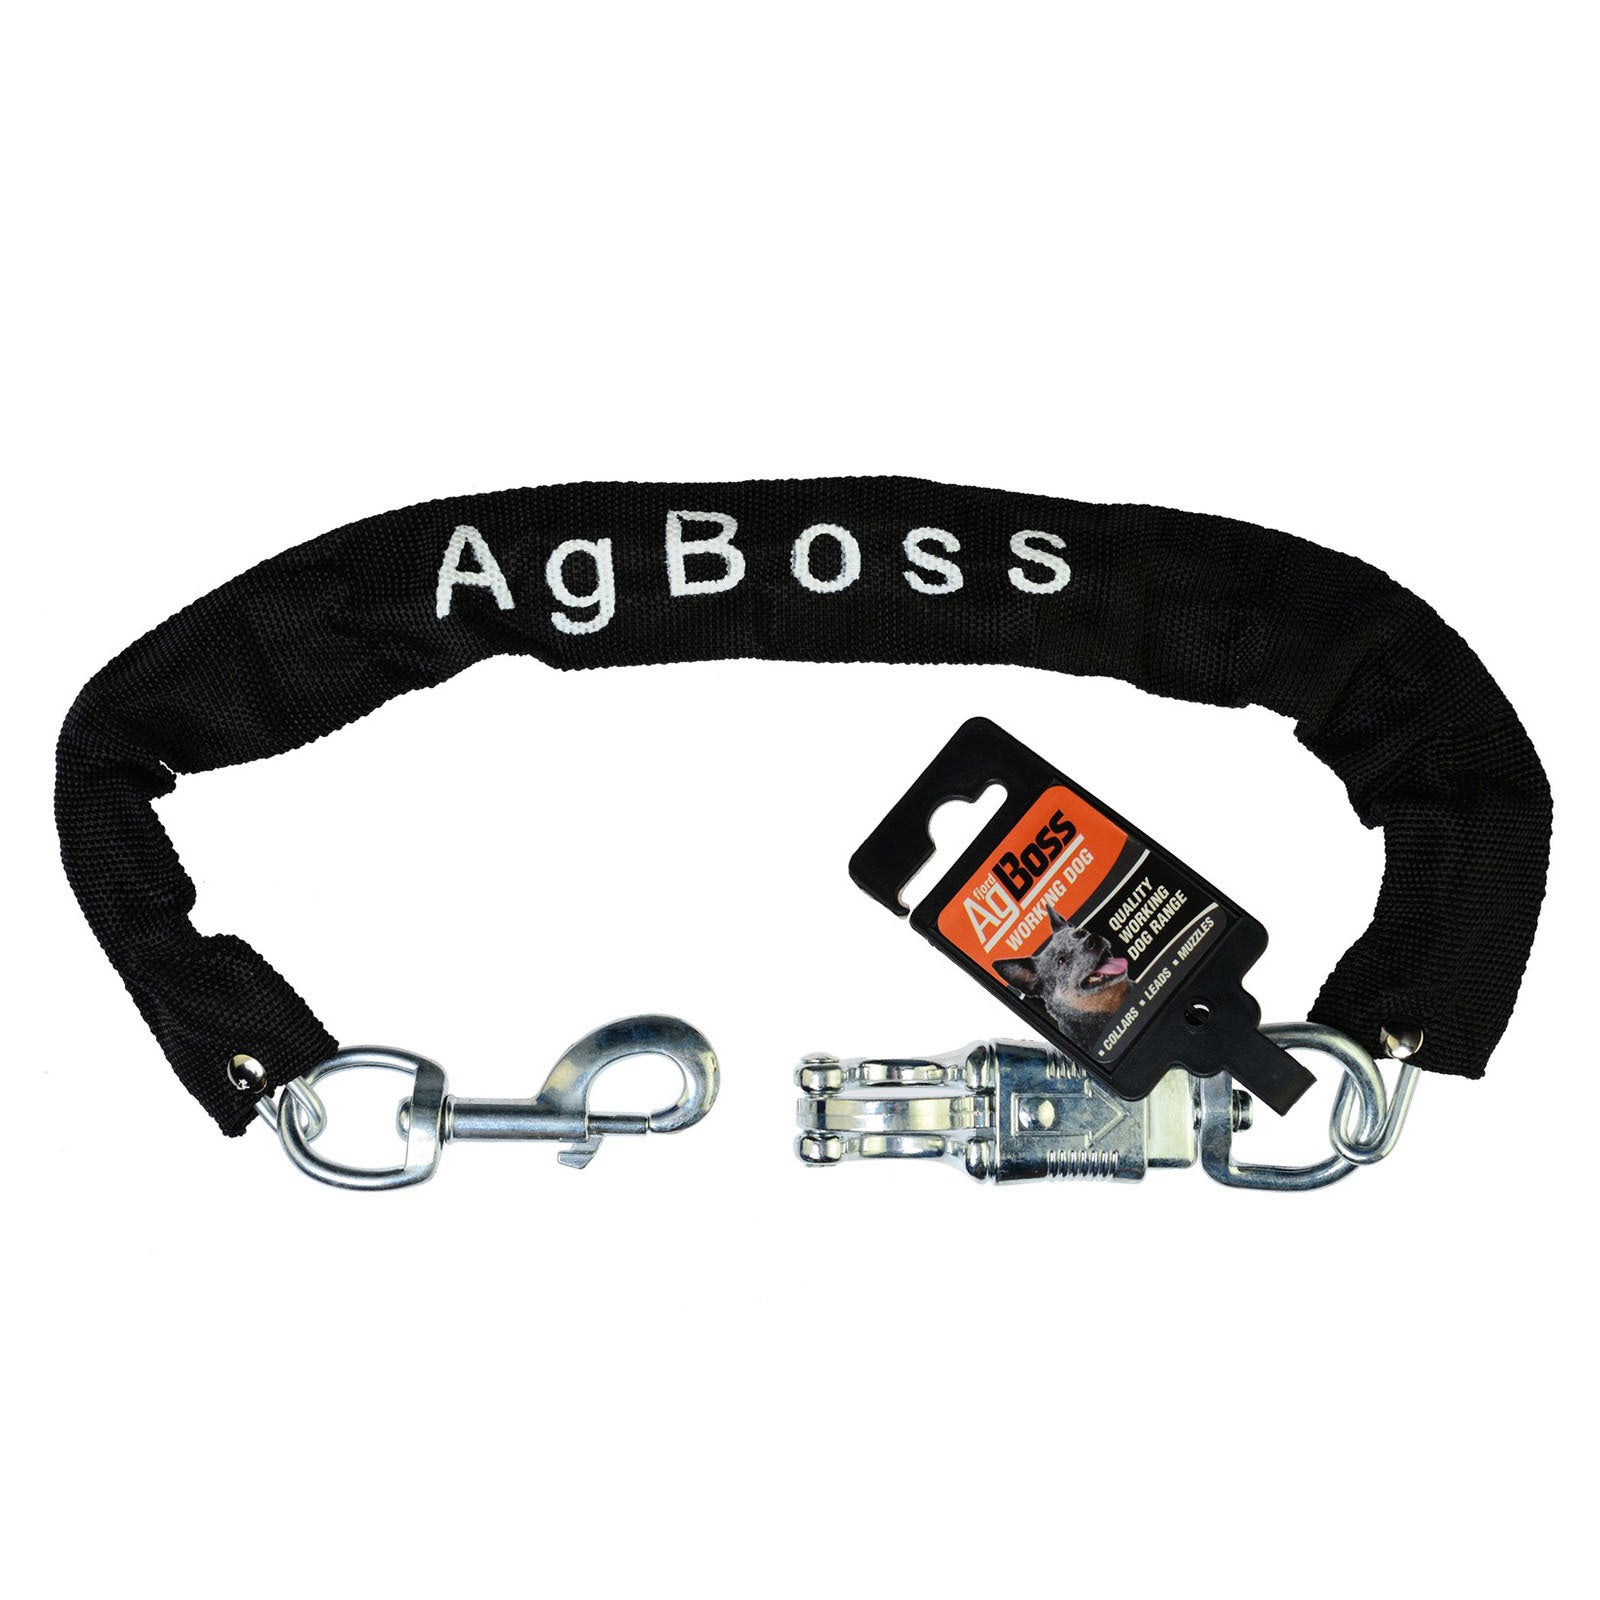 AgBoss 4mm x 500mm Dog Ute Chain with Quick Release